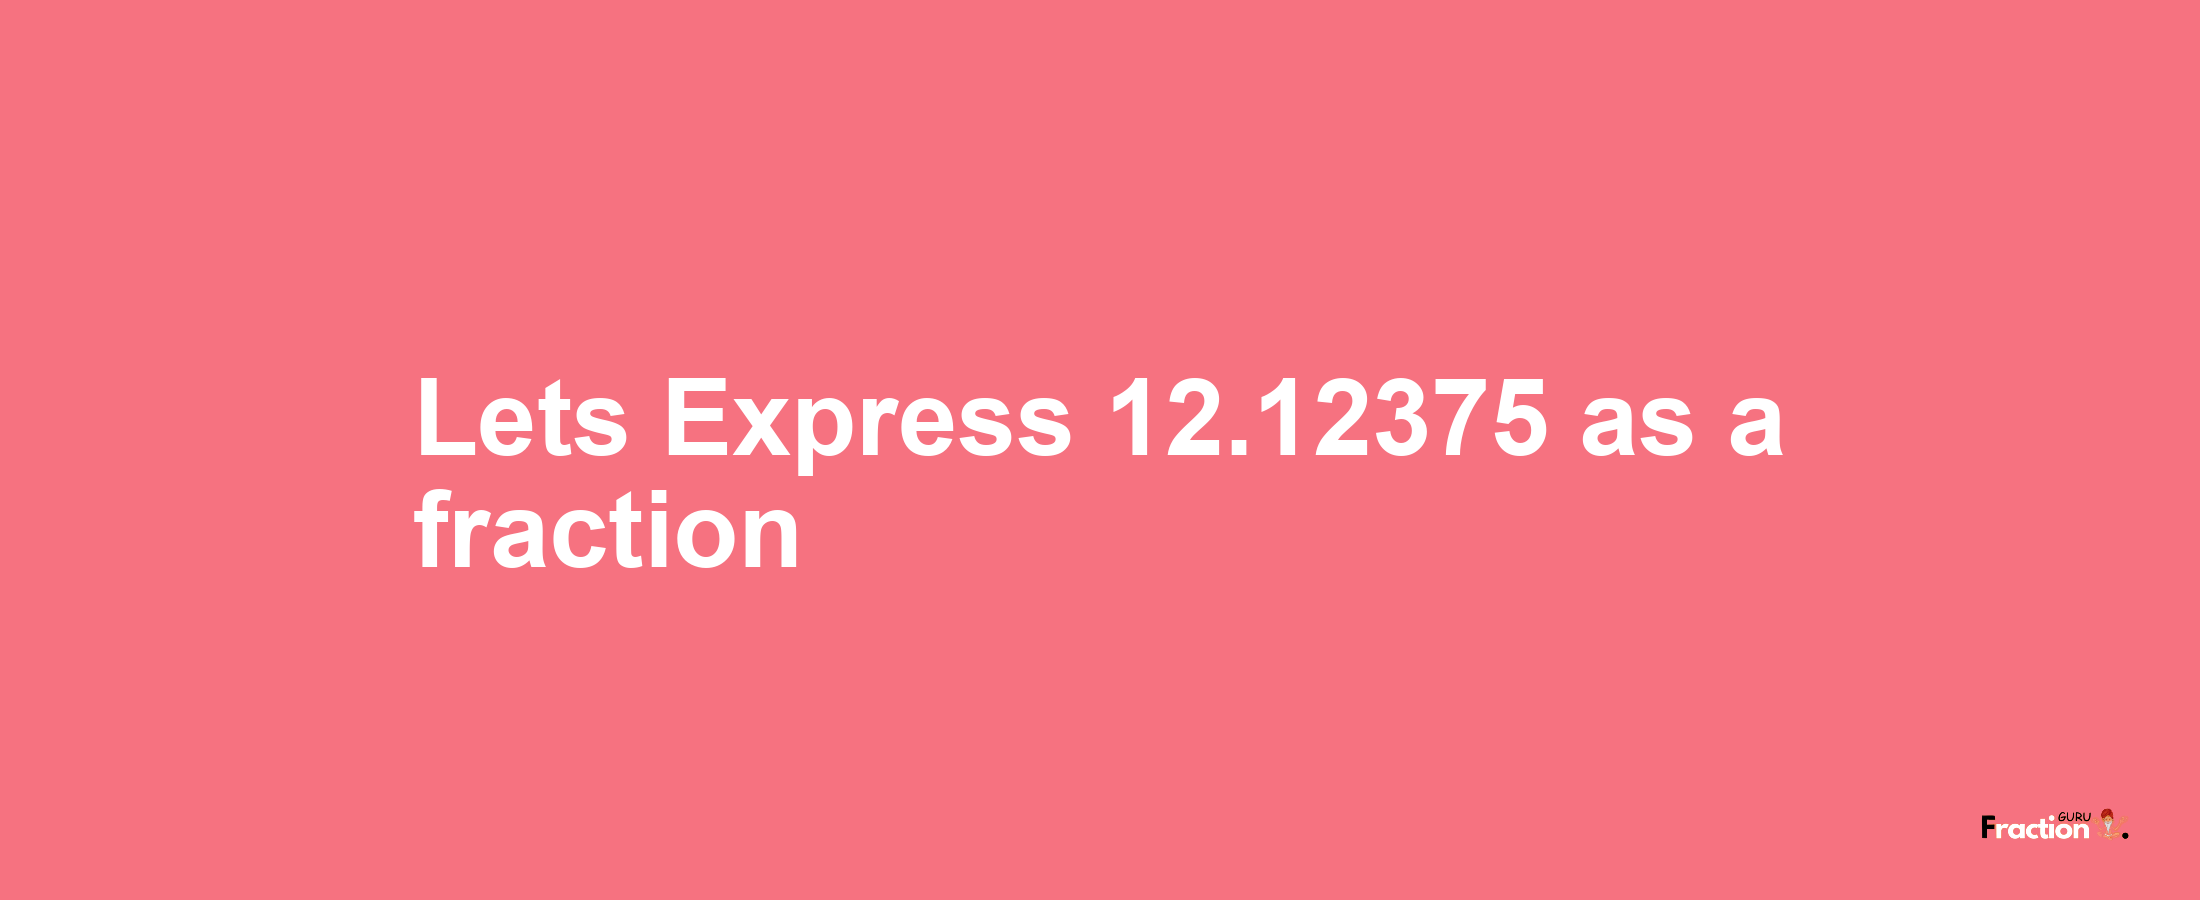 Lets Express 12.12375 as afraction